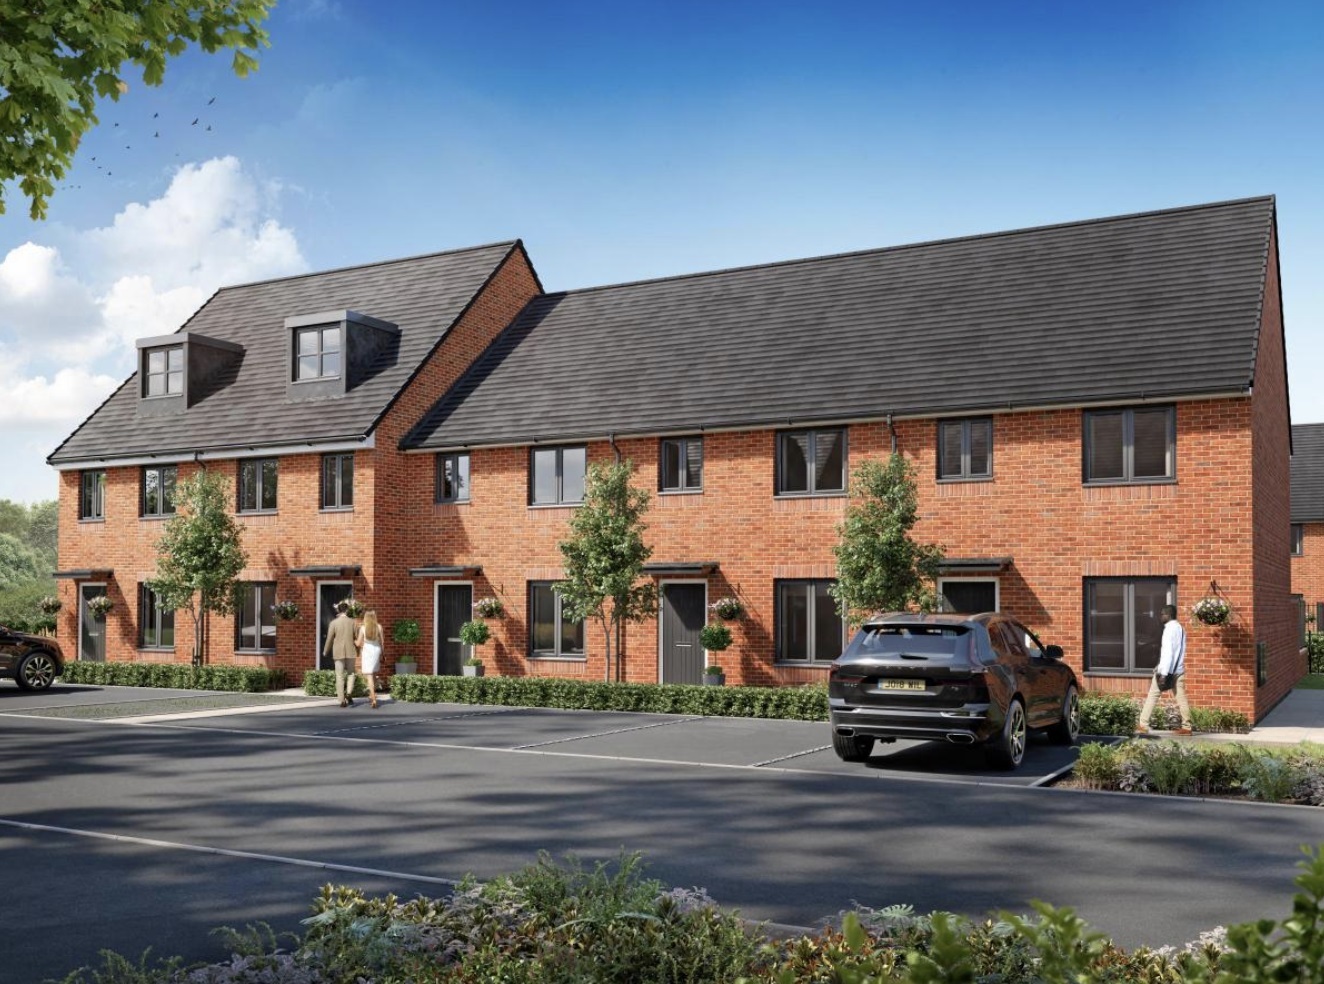 Heres how some of the new homes in the development will look. Pic - Taylor Wimpey